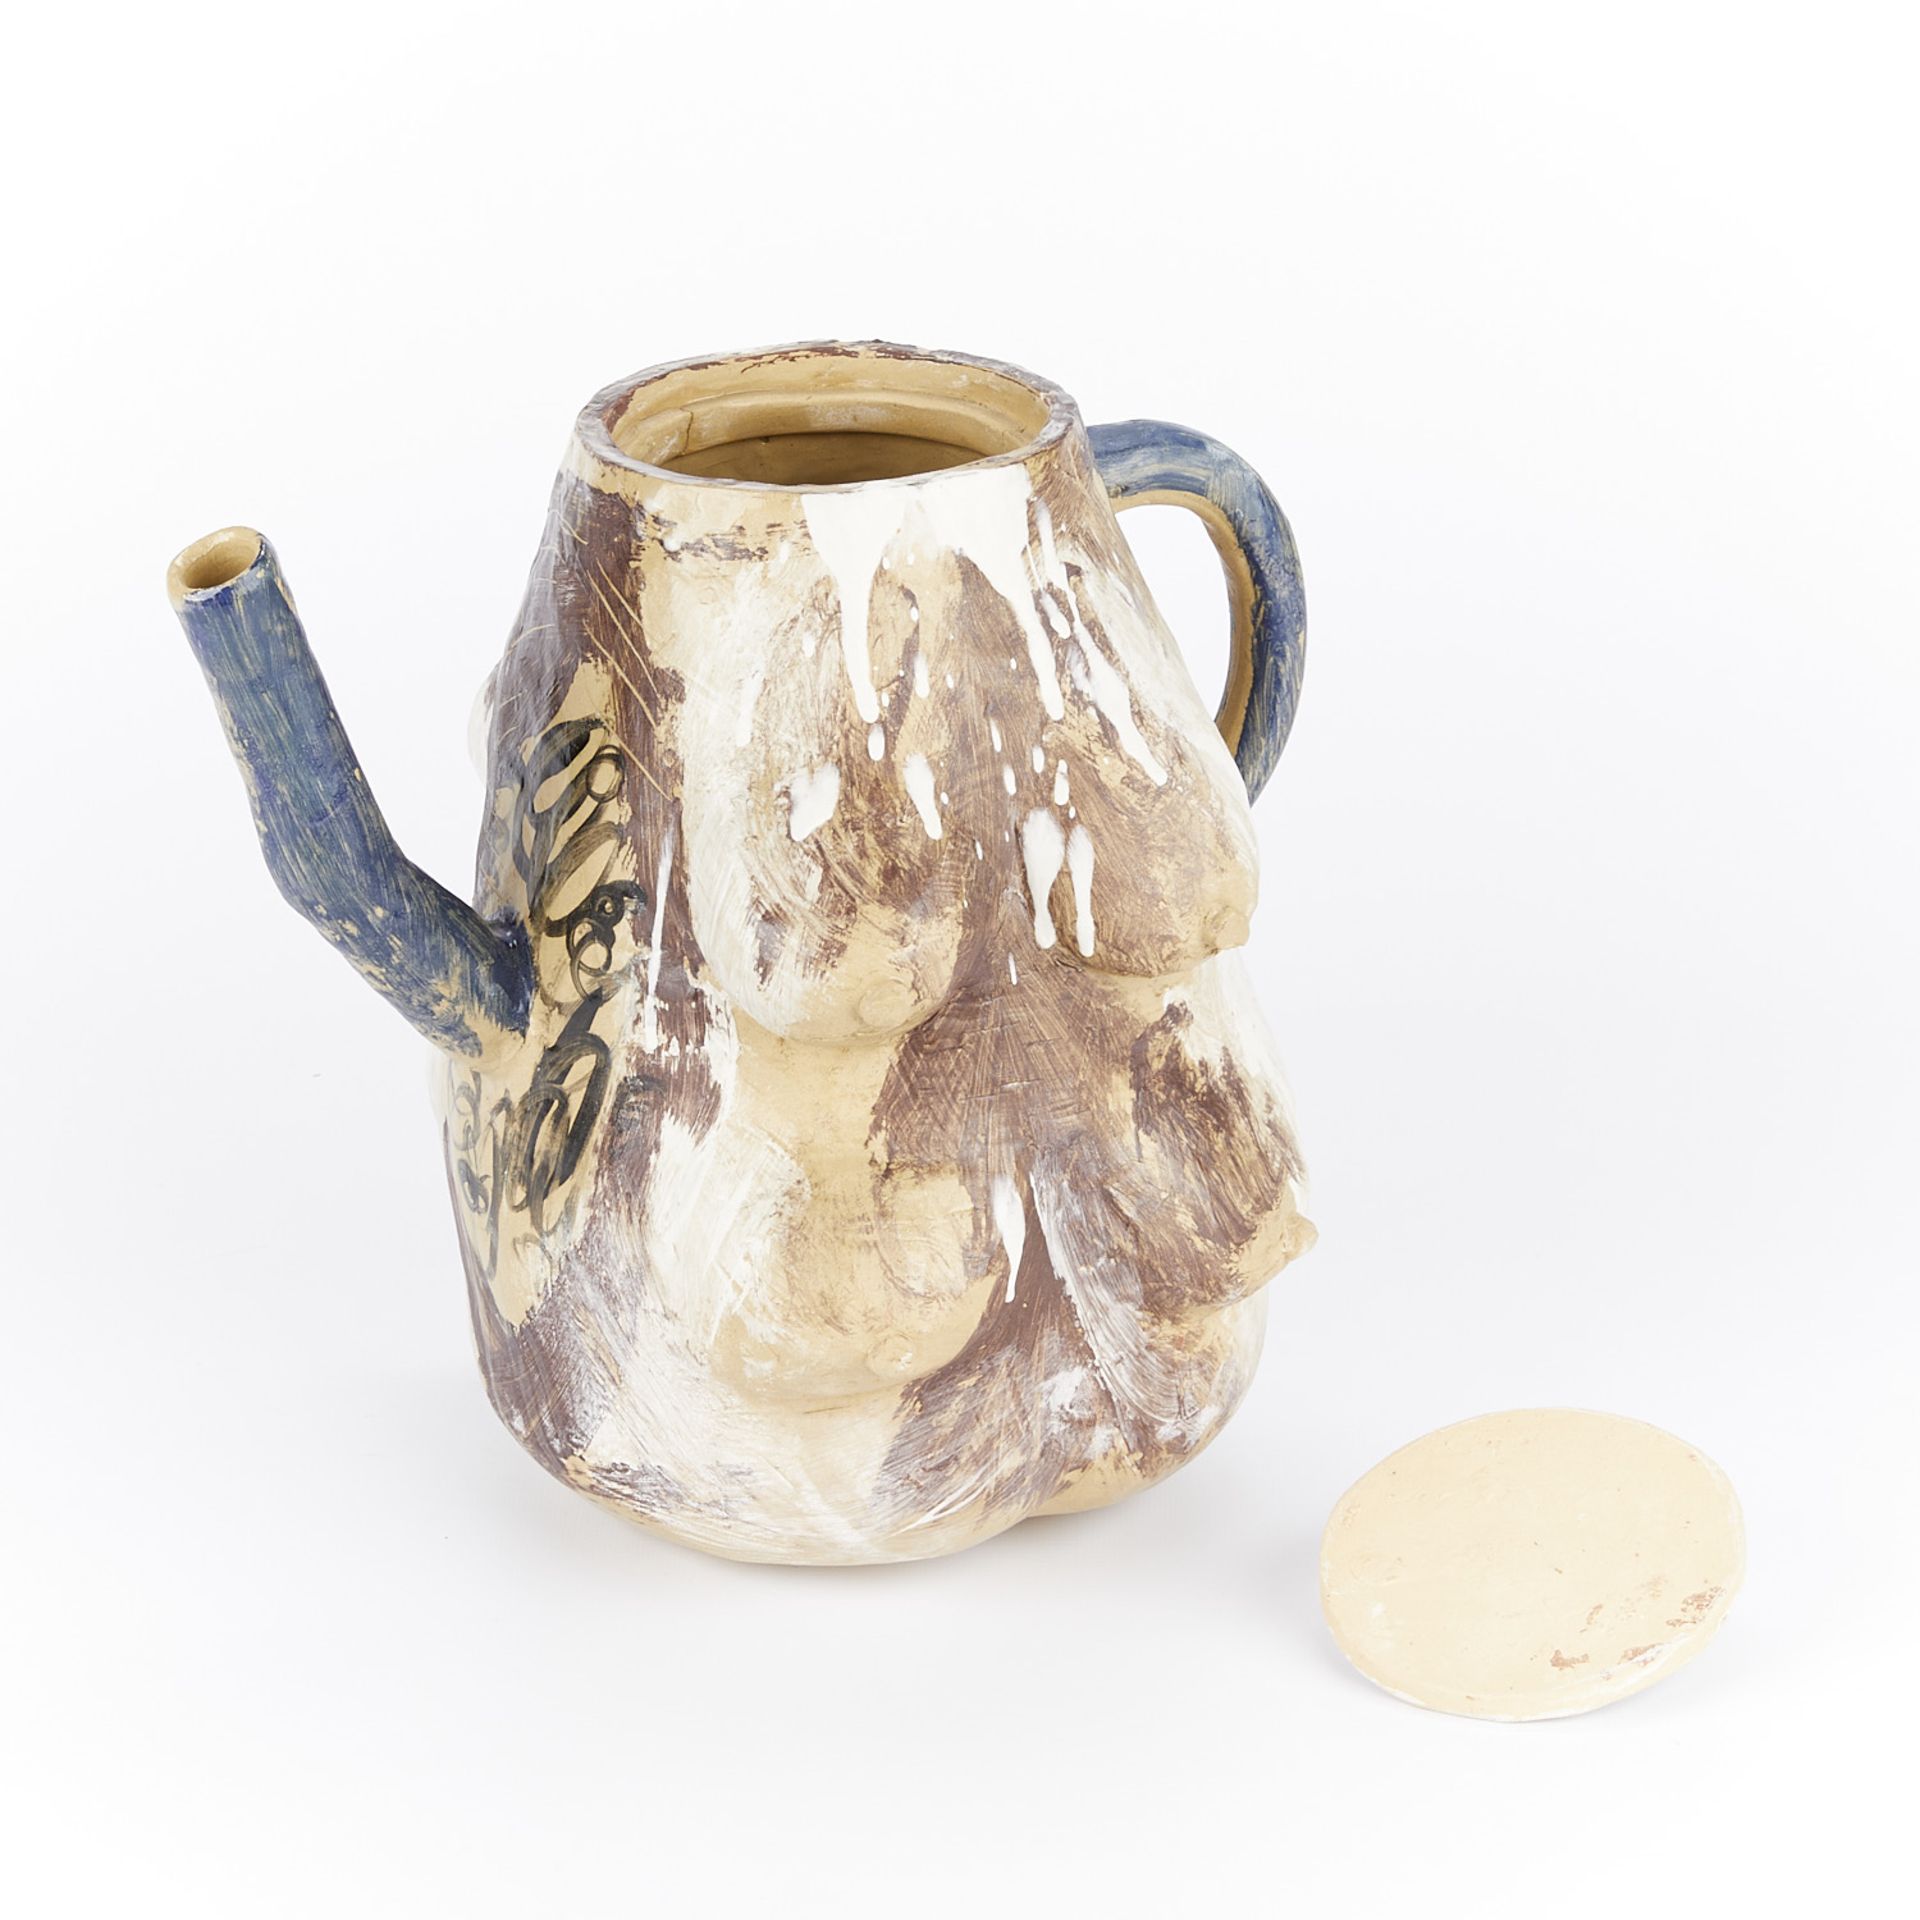 Laure Prouvost "Waiting for Grandad" Teapot - Image 8 of 13